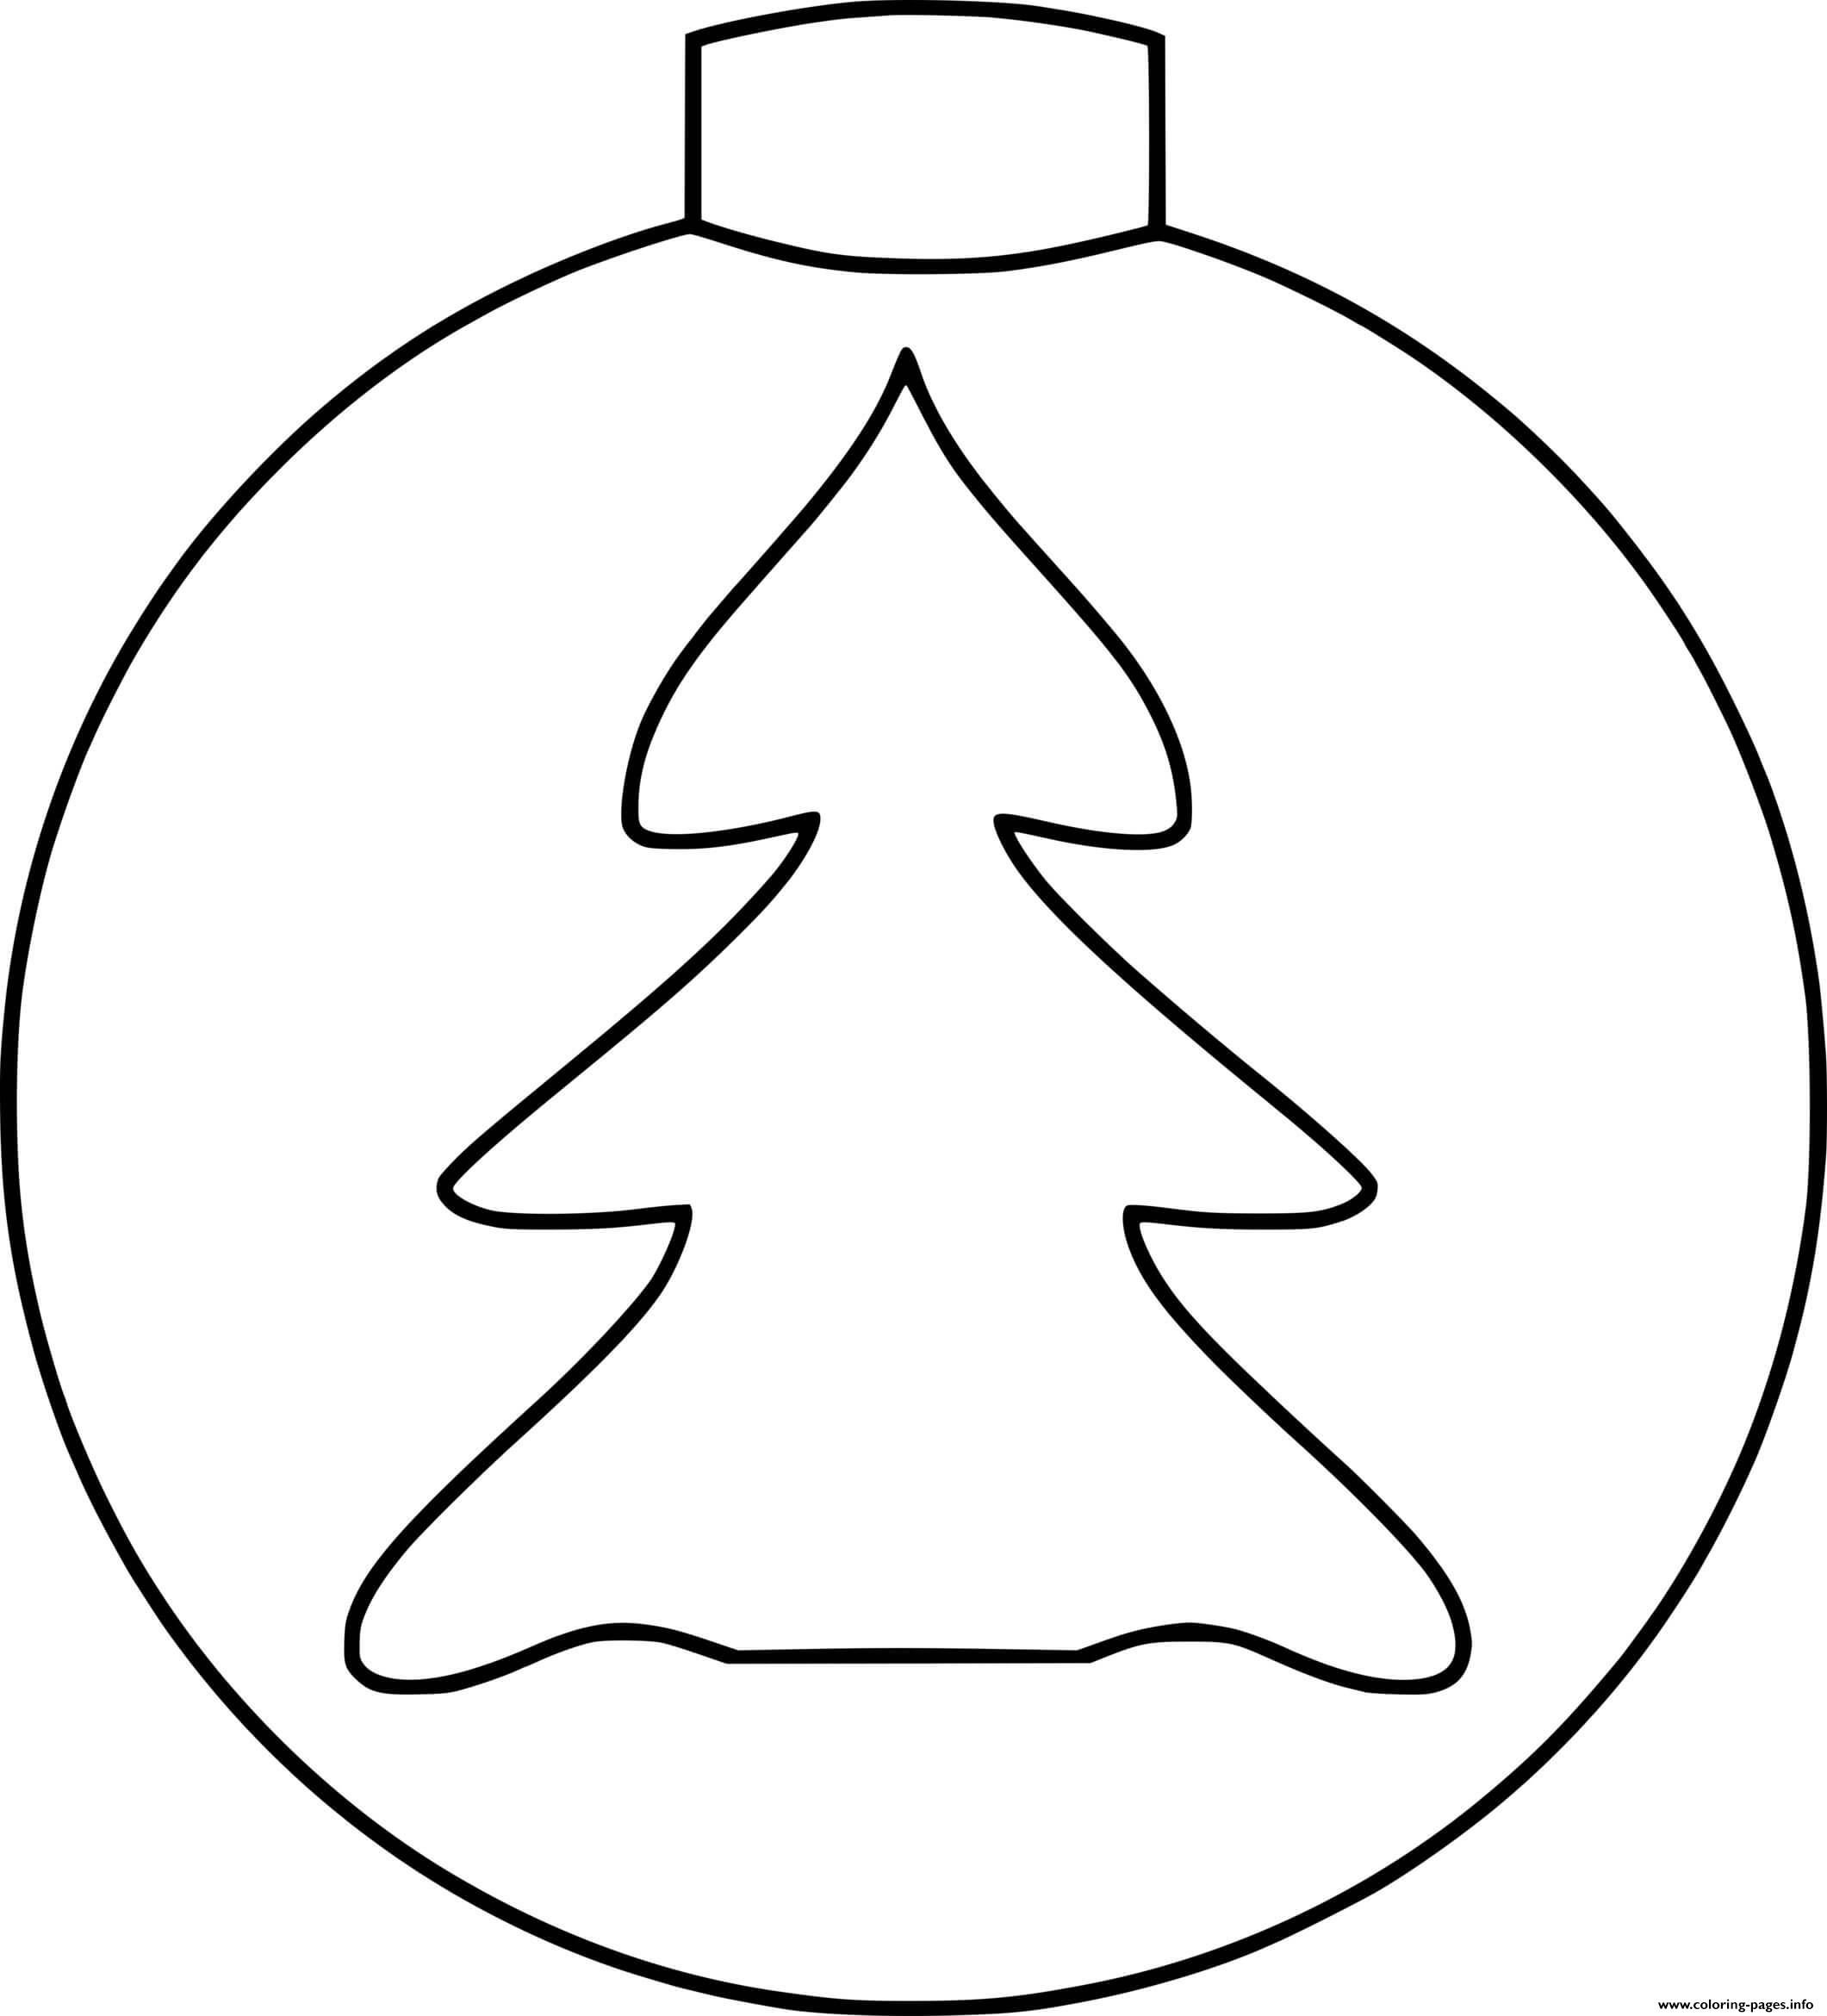 Simple Ornament With A Tree Coloring page Printable